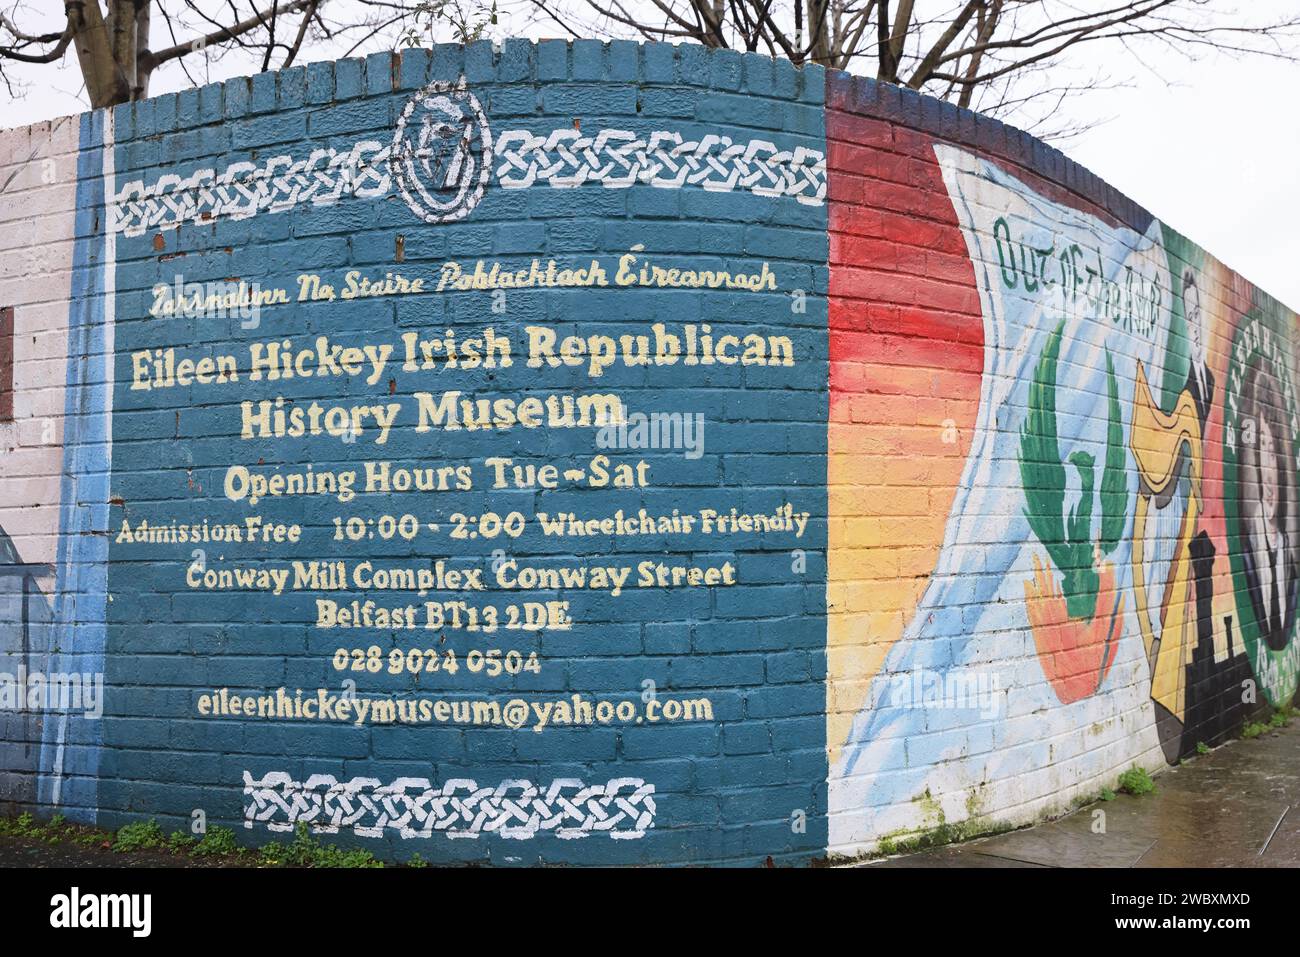 The Eileen Hickey Irish Republican History Museum off the Falls Road area, in West Belfast, made famous as a Nationalist and Republican area, NI, UK Stock Photo